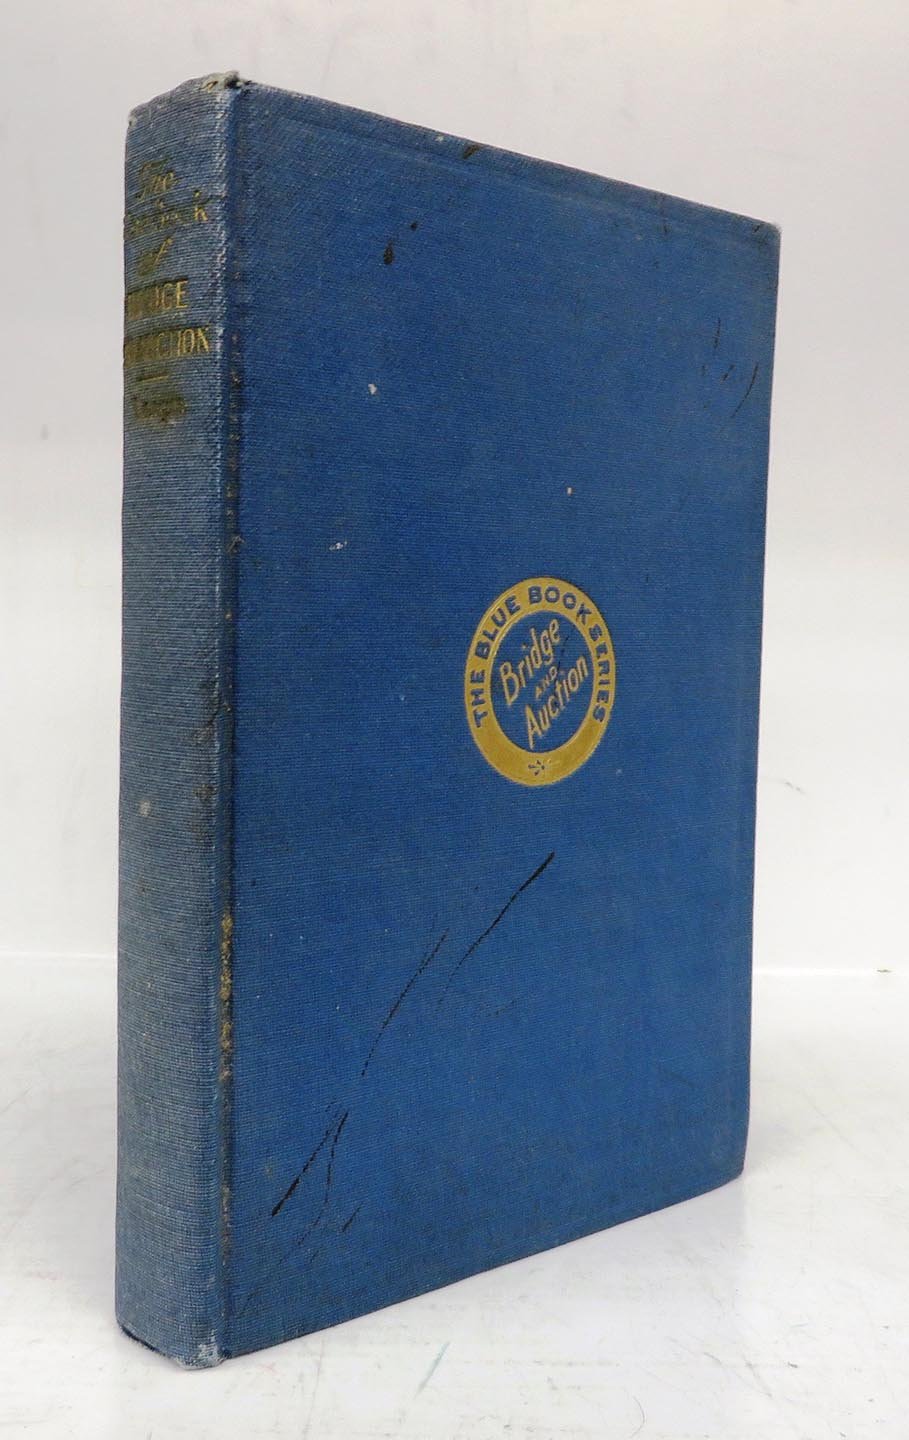 The Blue Book of Bridge and Auction 